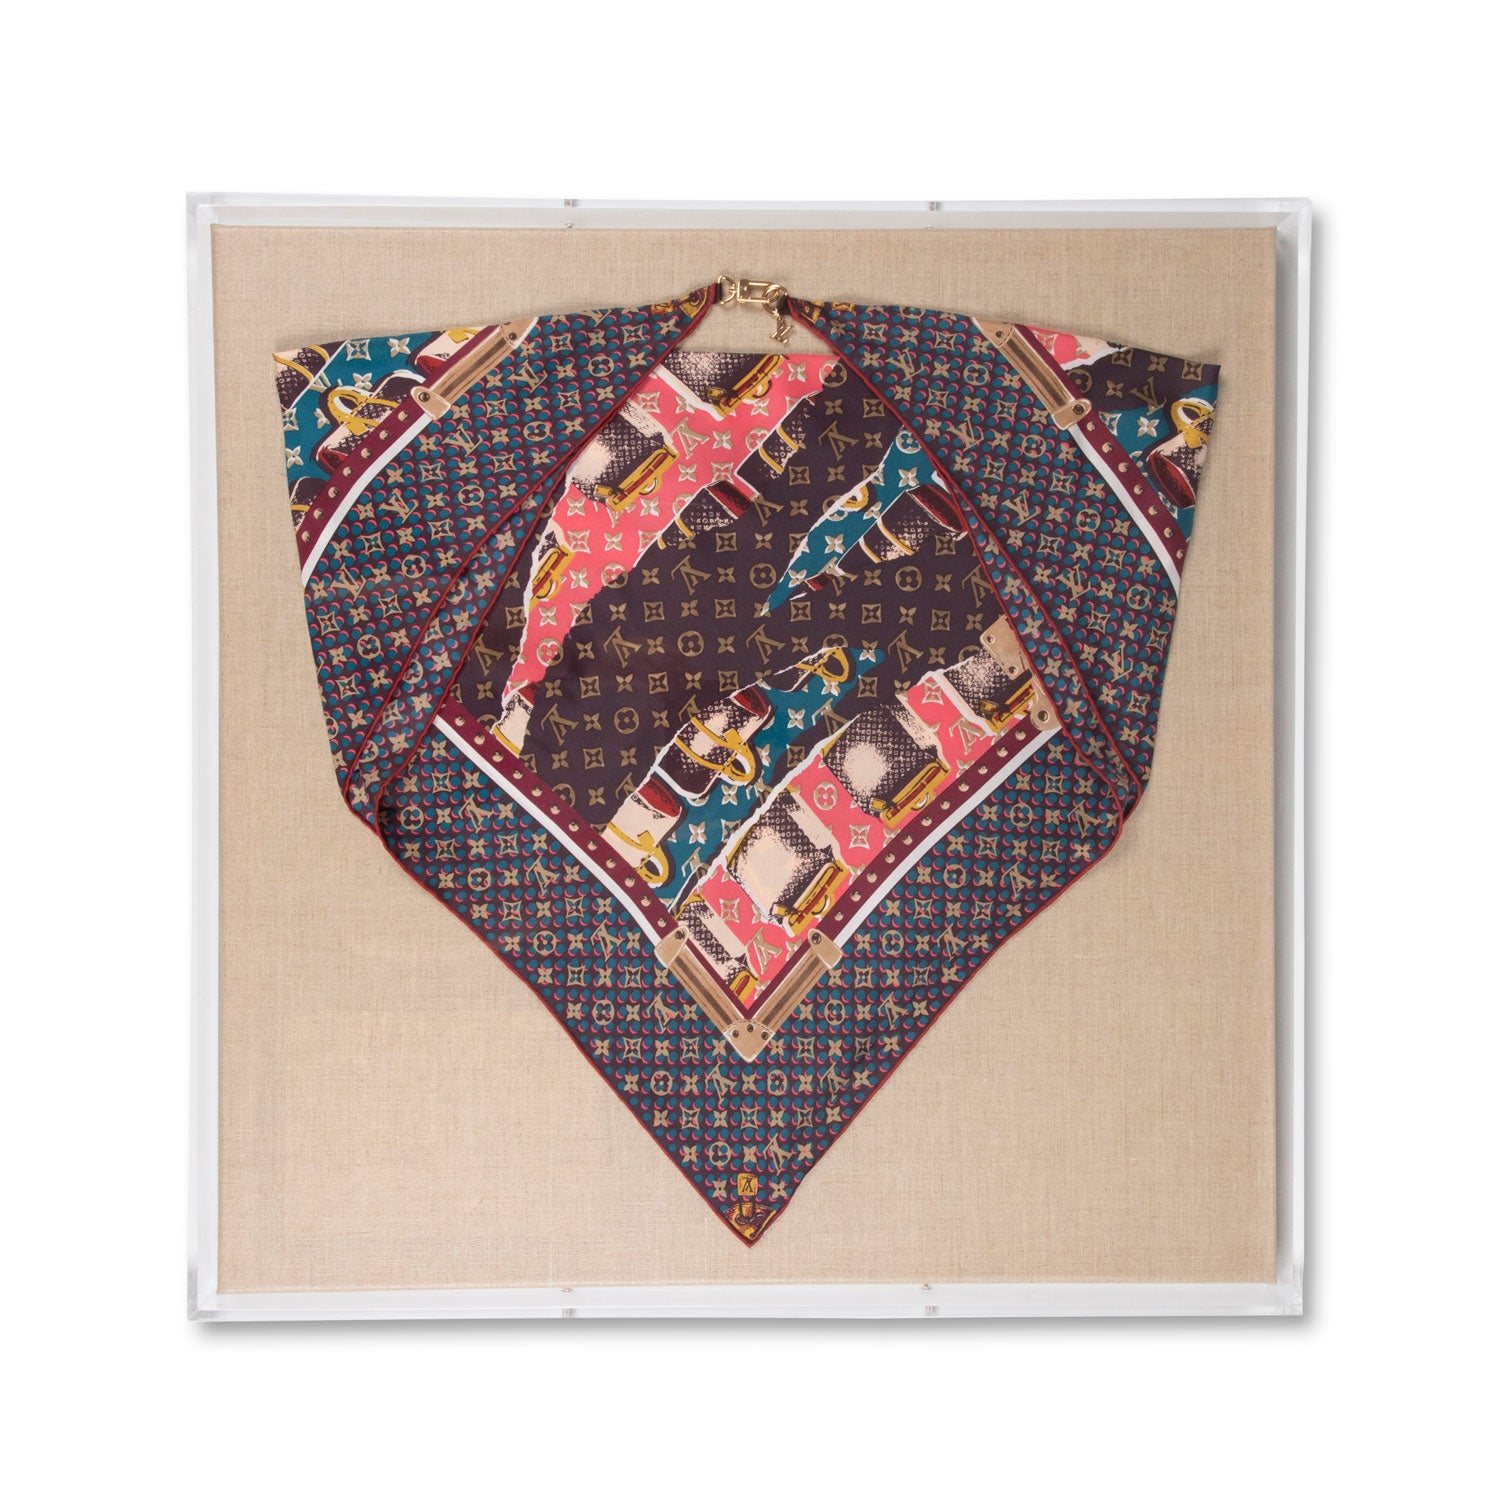 Framed Louis Vuitton Multicolor Voyages Scarf in a 24x24x2